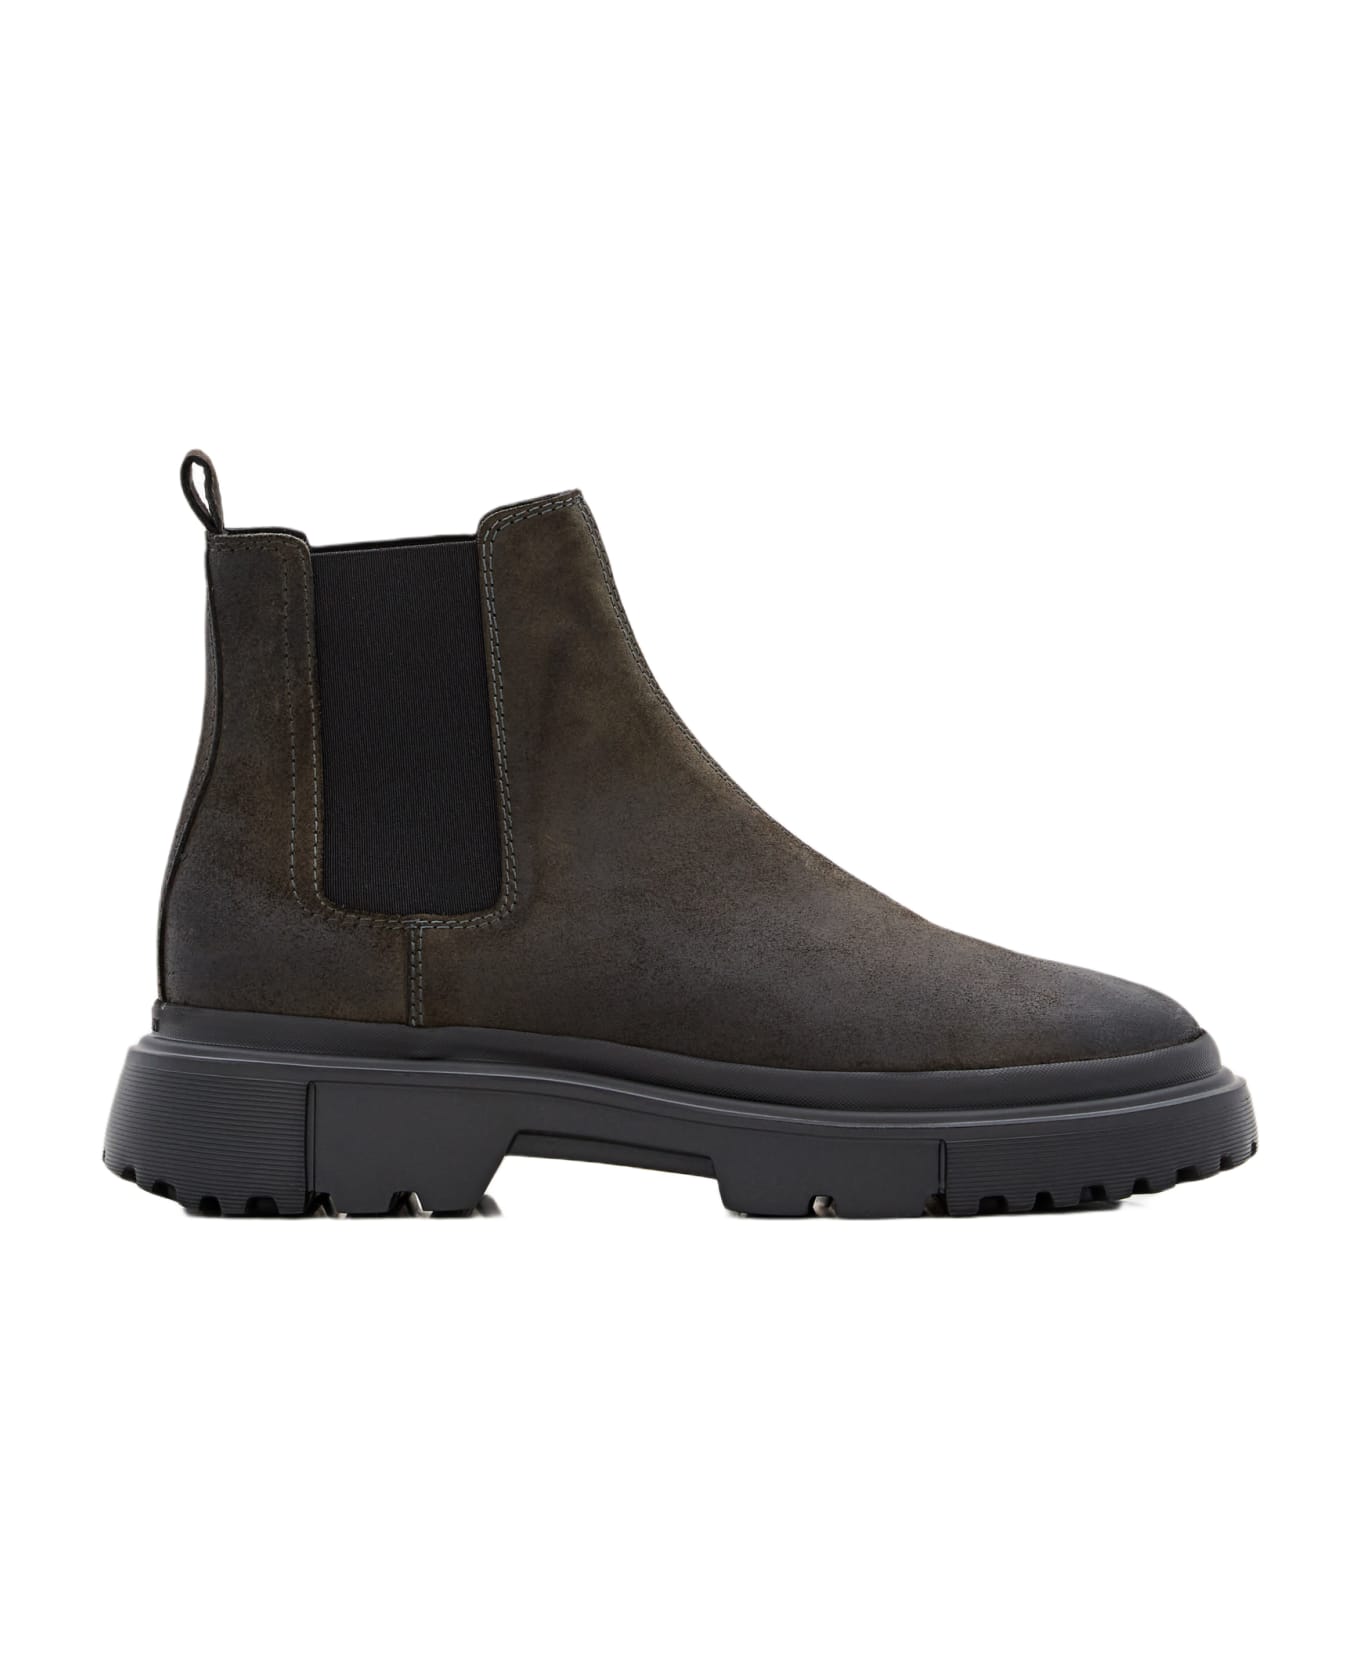 Hogan H629 Chelsea Ankle Boots - ANTRACITE